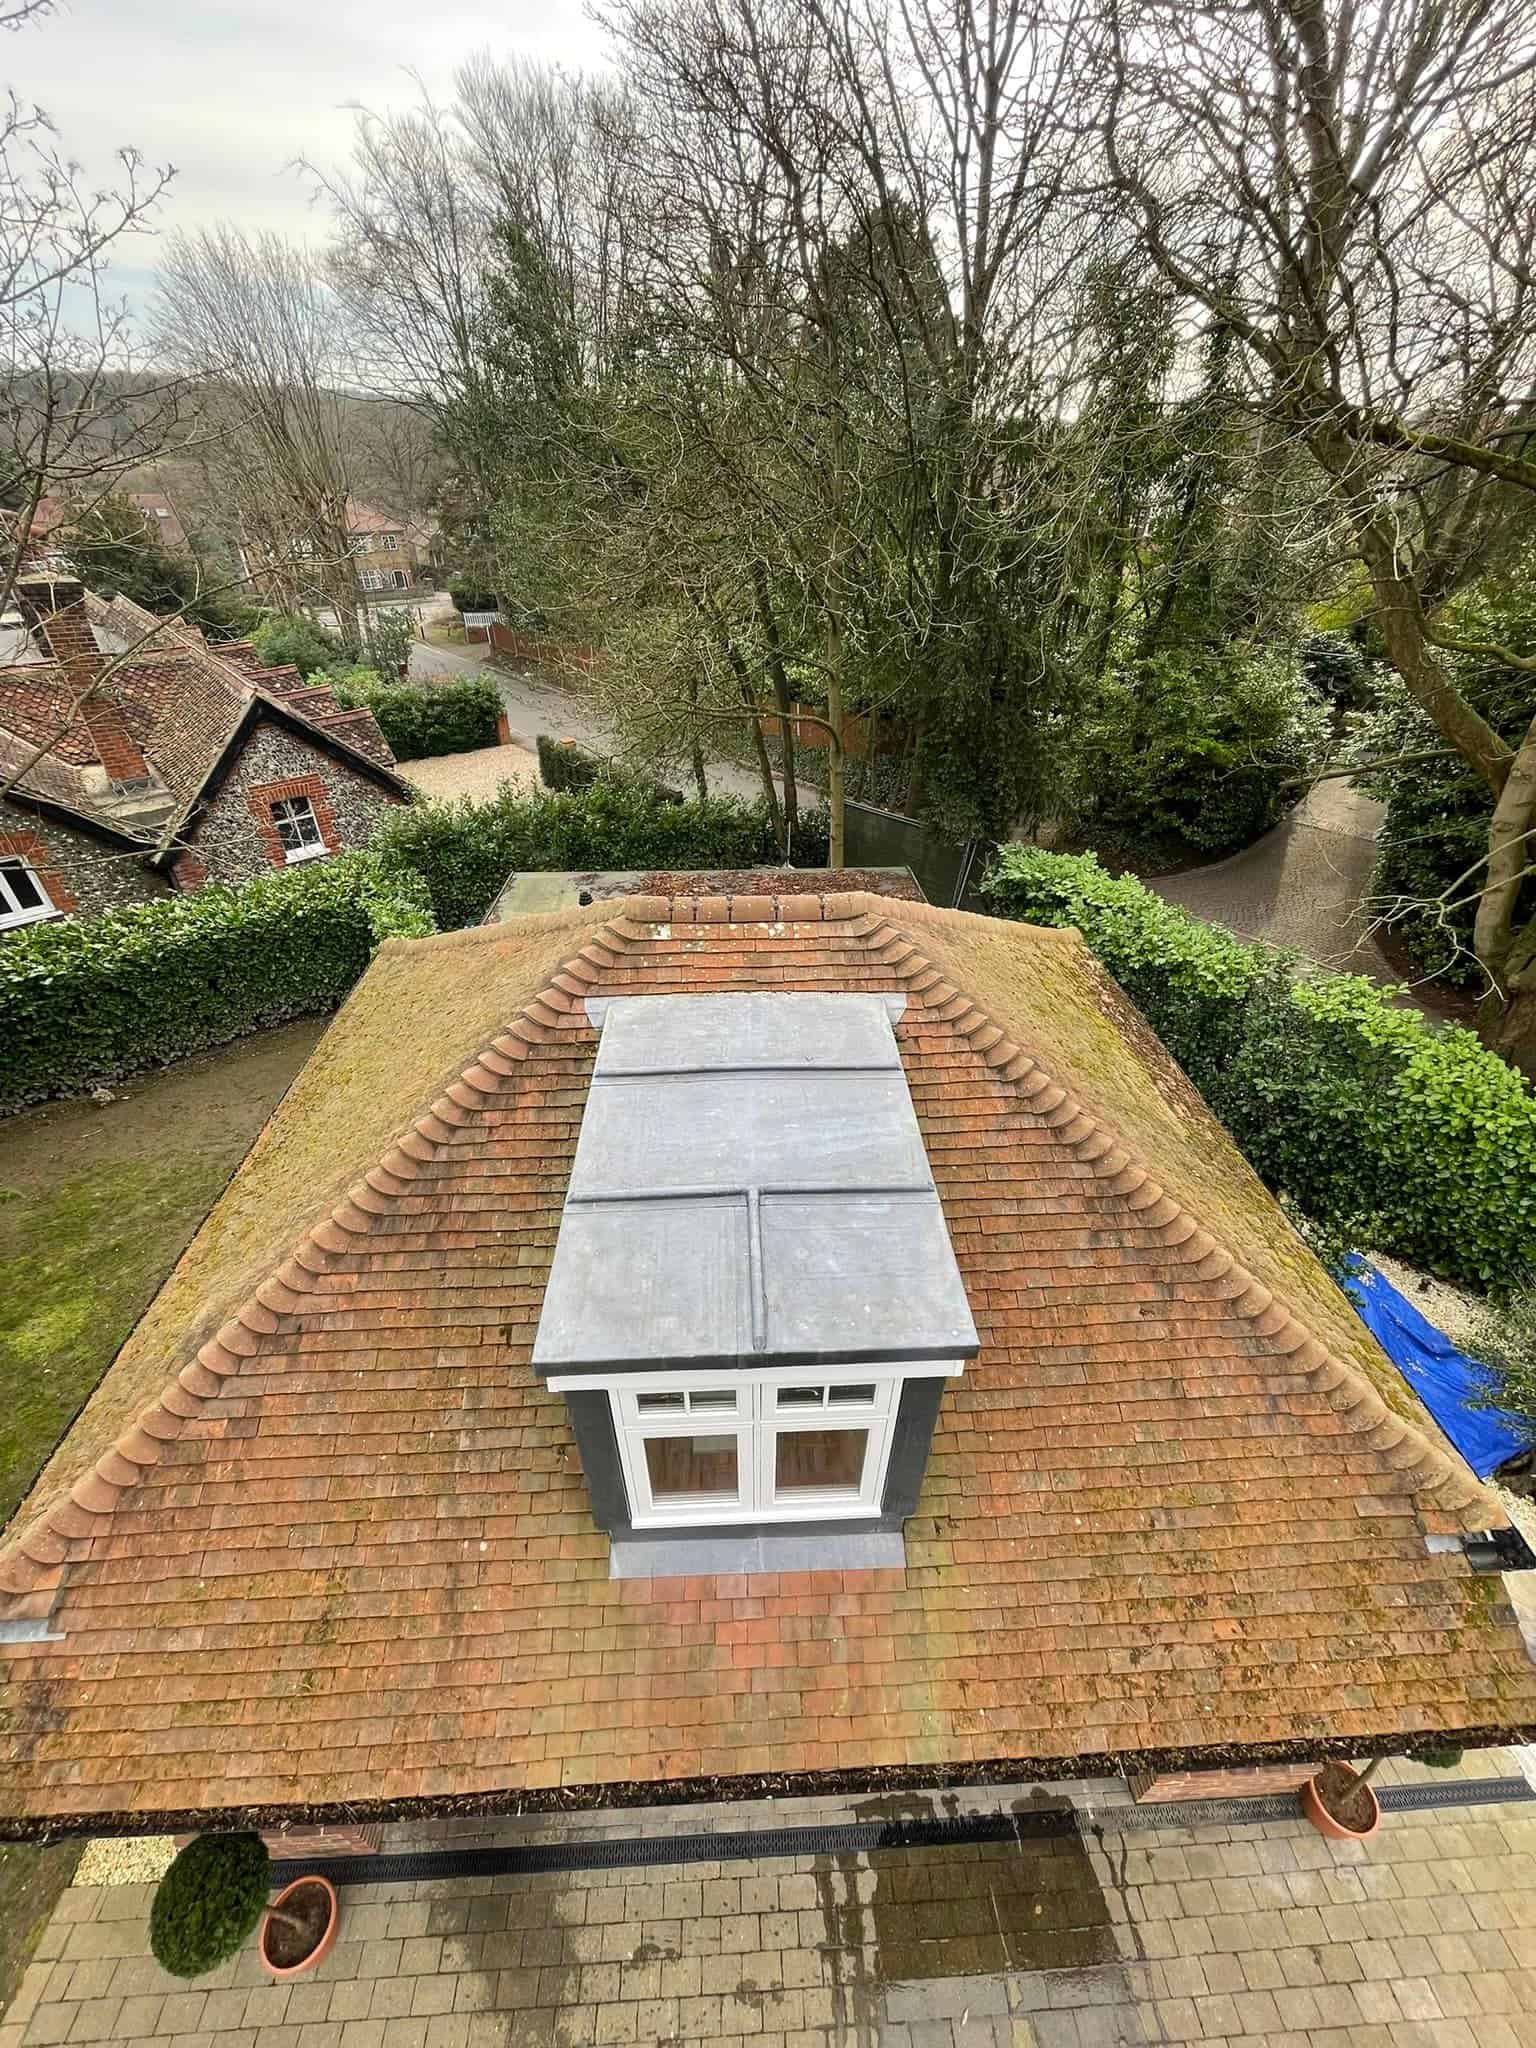 A roof of a house with trees and bushes in London, requiring roof cleaning.